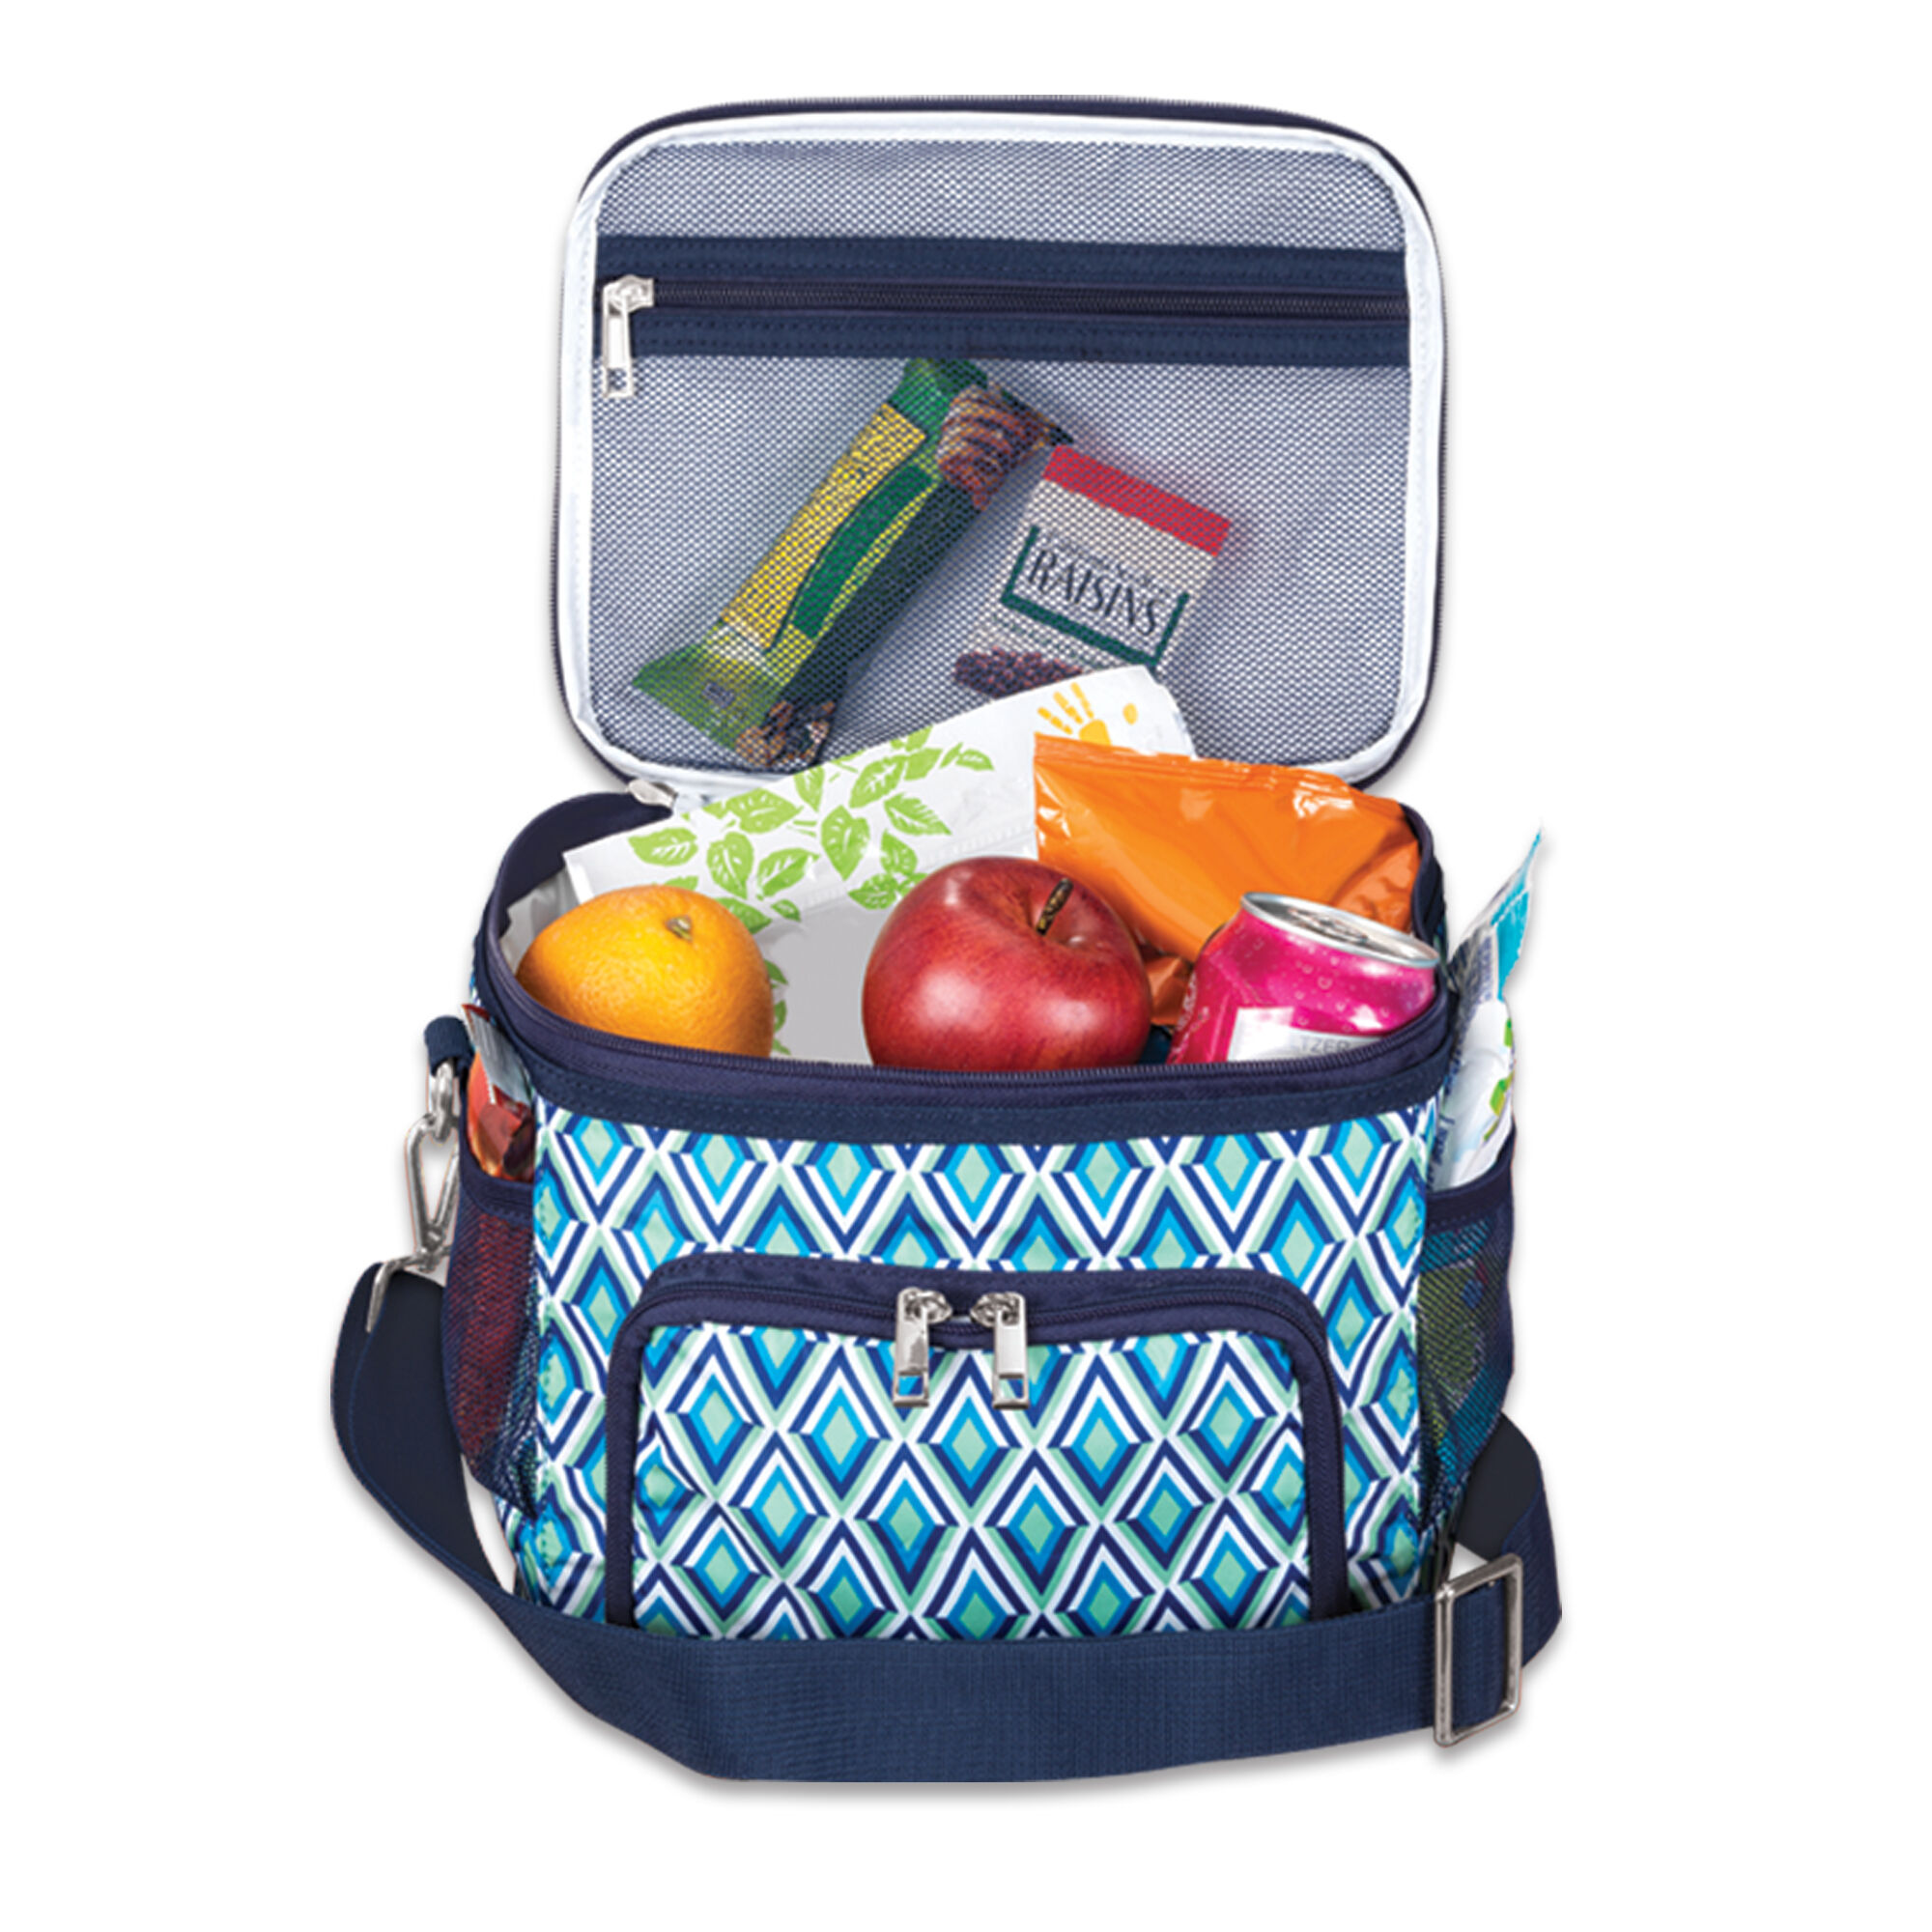 The Personalized Family Cooler Set 10204 0029 c openbag